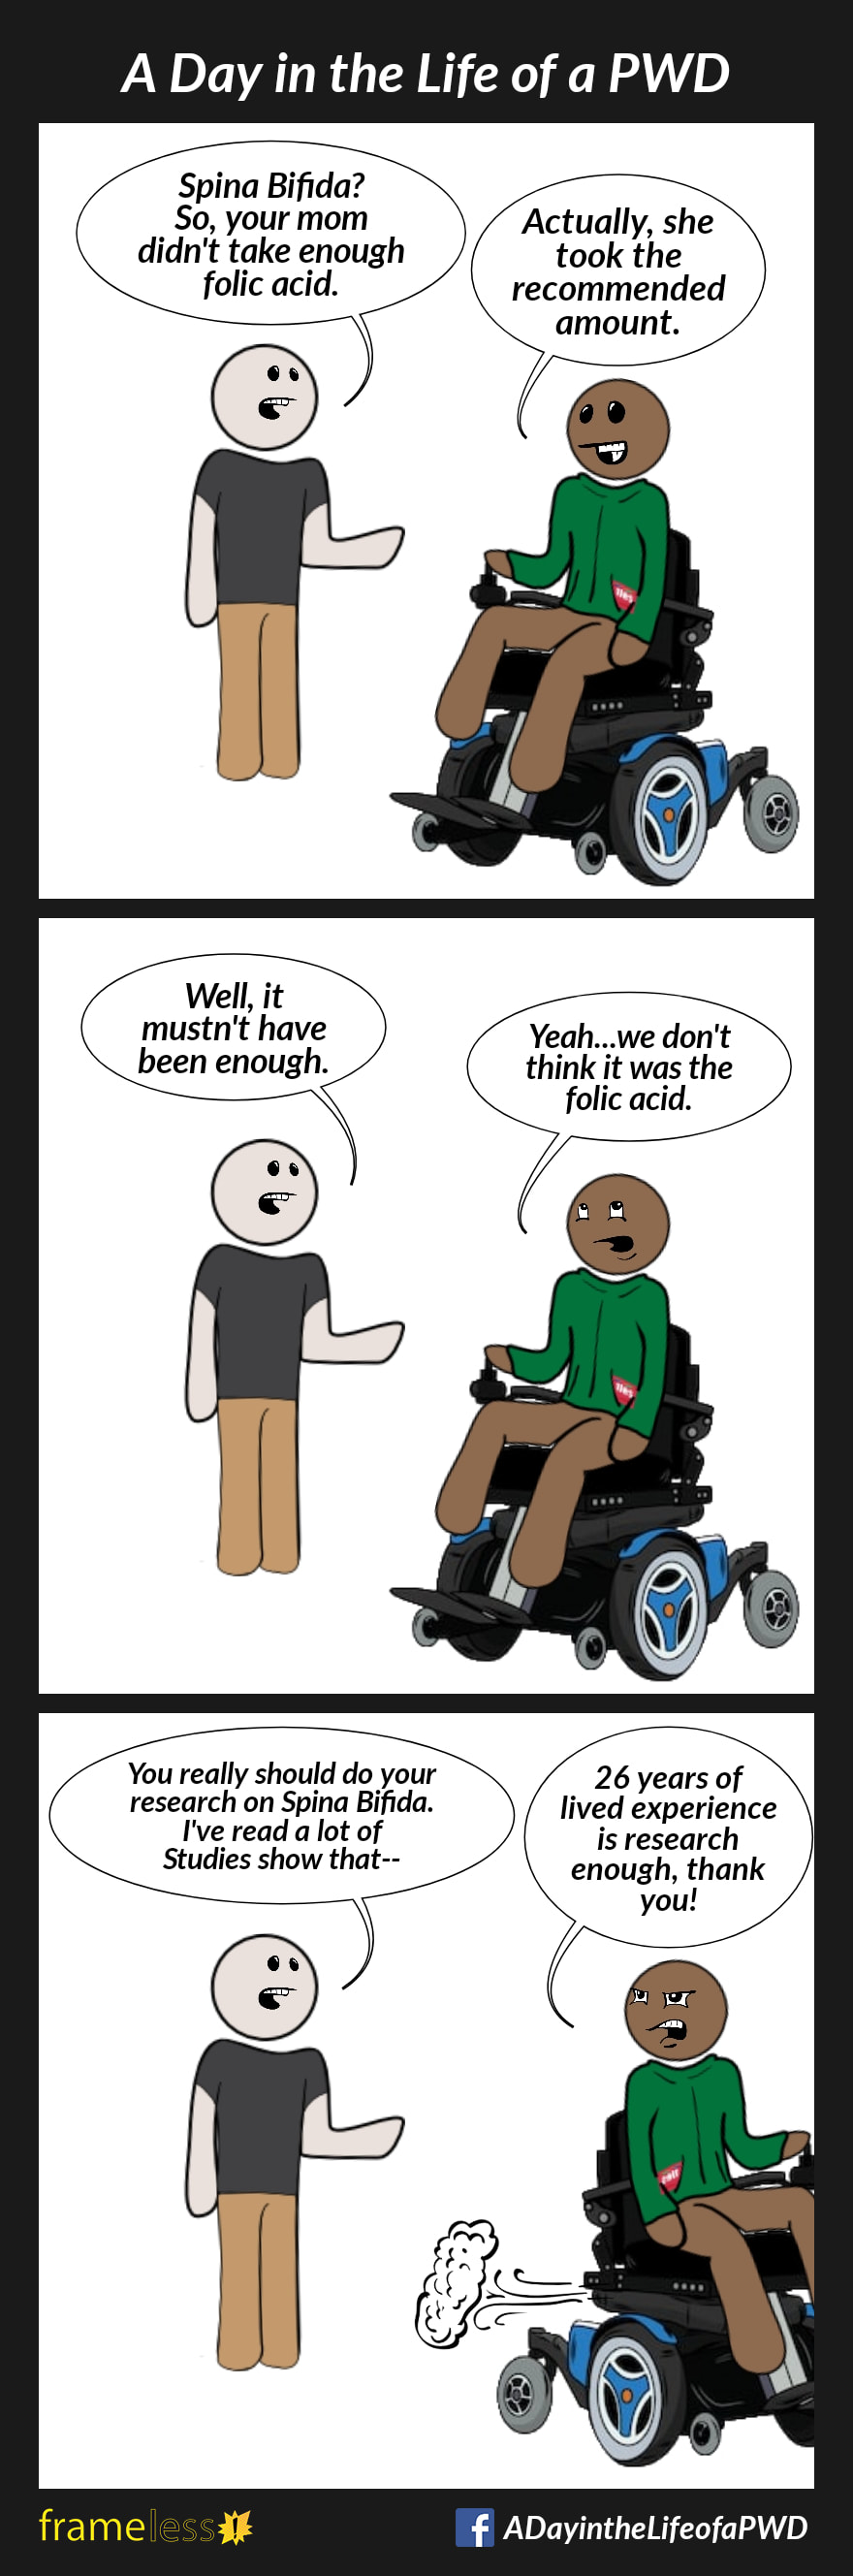 COMIC STRIP 
A Day in the Life of a PWD (Person With a Disability) 

Frame 1:
A power wheelchair user is talking with another man. 
MAN: Spina Bifida? So, your mom didn't take enough folic acid.
WHEELCHAIR USER: Actually, she took the recommended amount.

Frame 2:
MAN: Well, it mustn't have been enough.
WHEELCHAIR USER (rolling eyes): Yeah...we don't think it was the folic acid.

Frame 3:
MAN: You really should do your research on Spina Bifida. I've read a lot studies that show that...
WHEELCHAIR USER (rolling away, irritated): 26 years of lived experience is research enough, thank you!